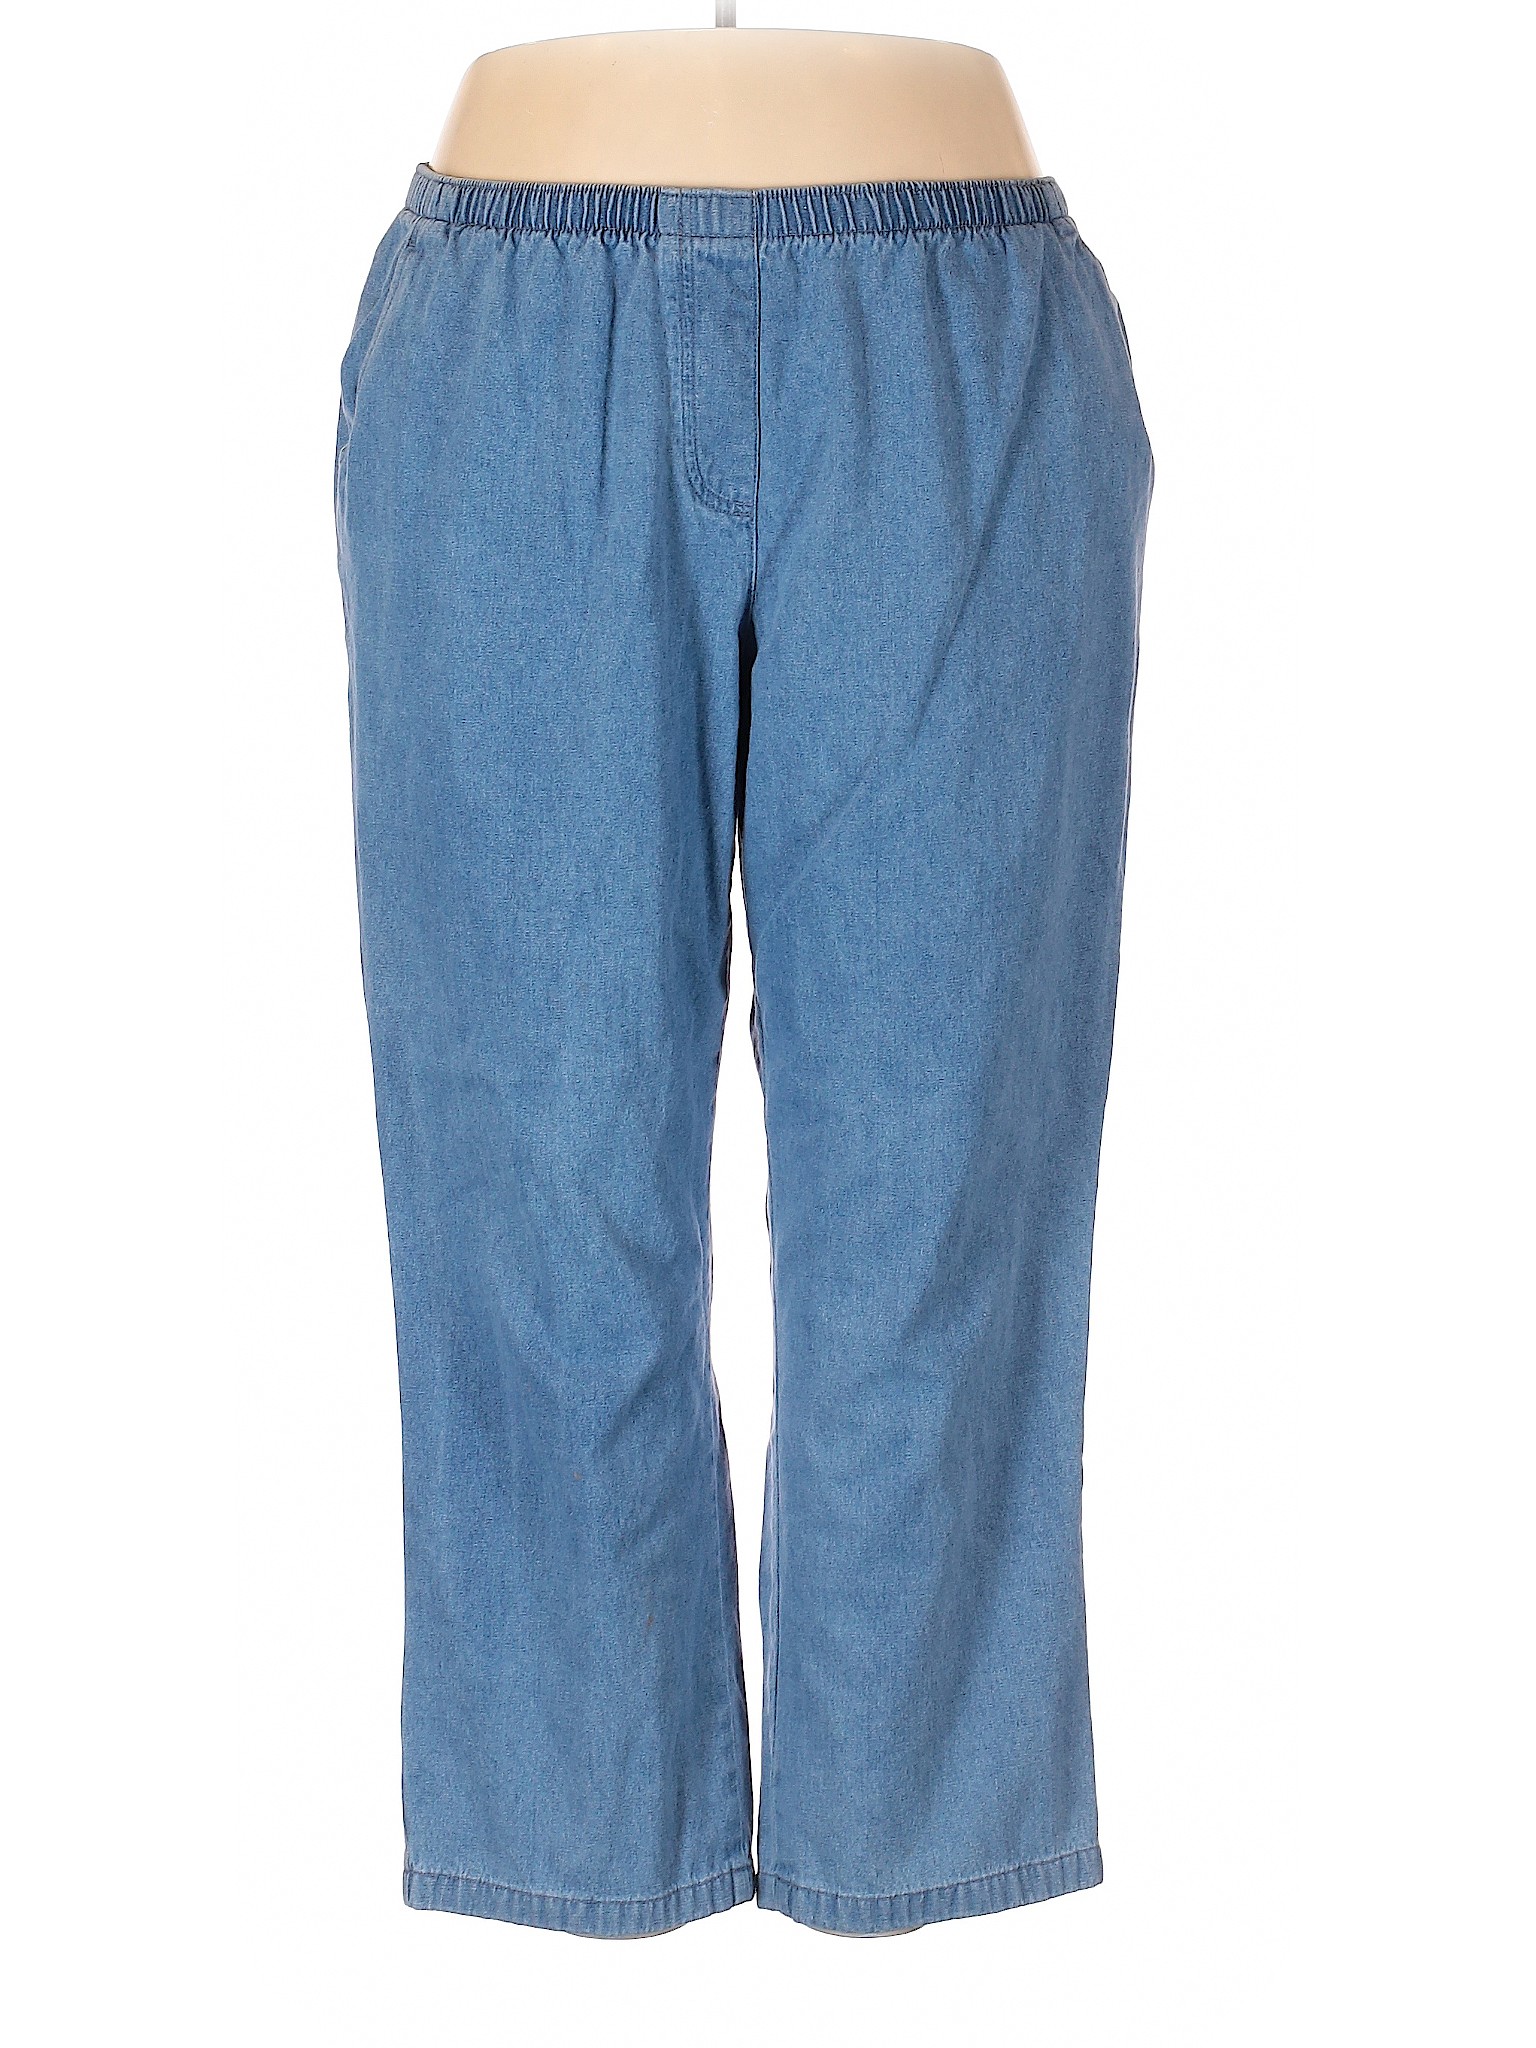 Carroll Reed 100% Cotton Solid Blue Casual Pants Size 22W (Plus) - 66% ...